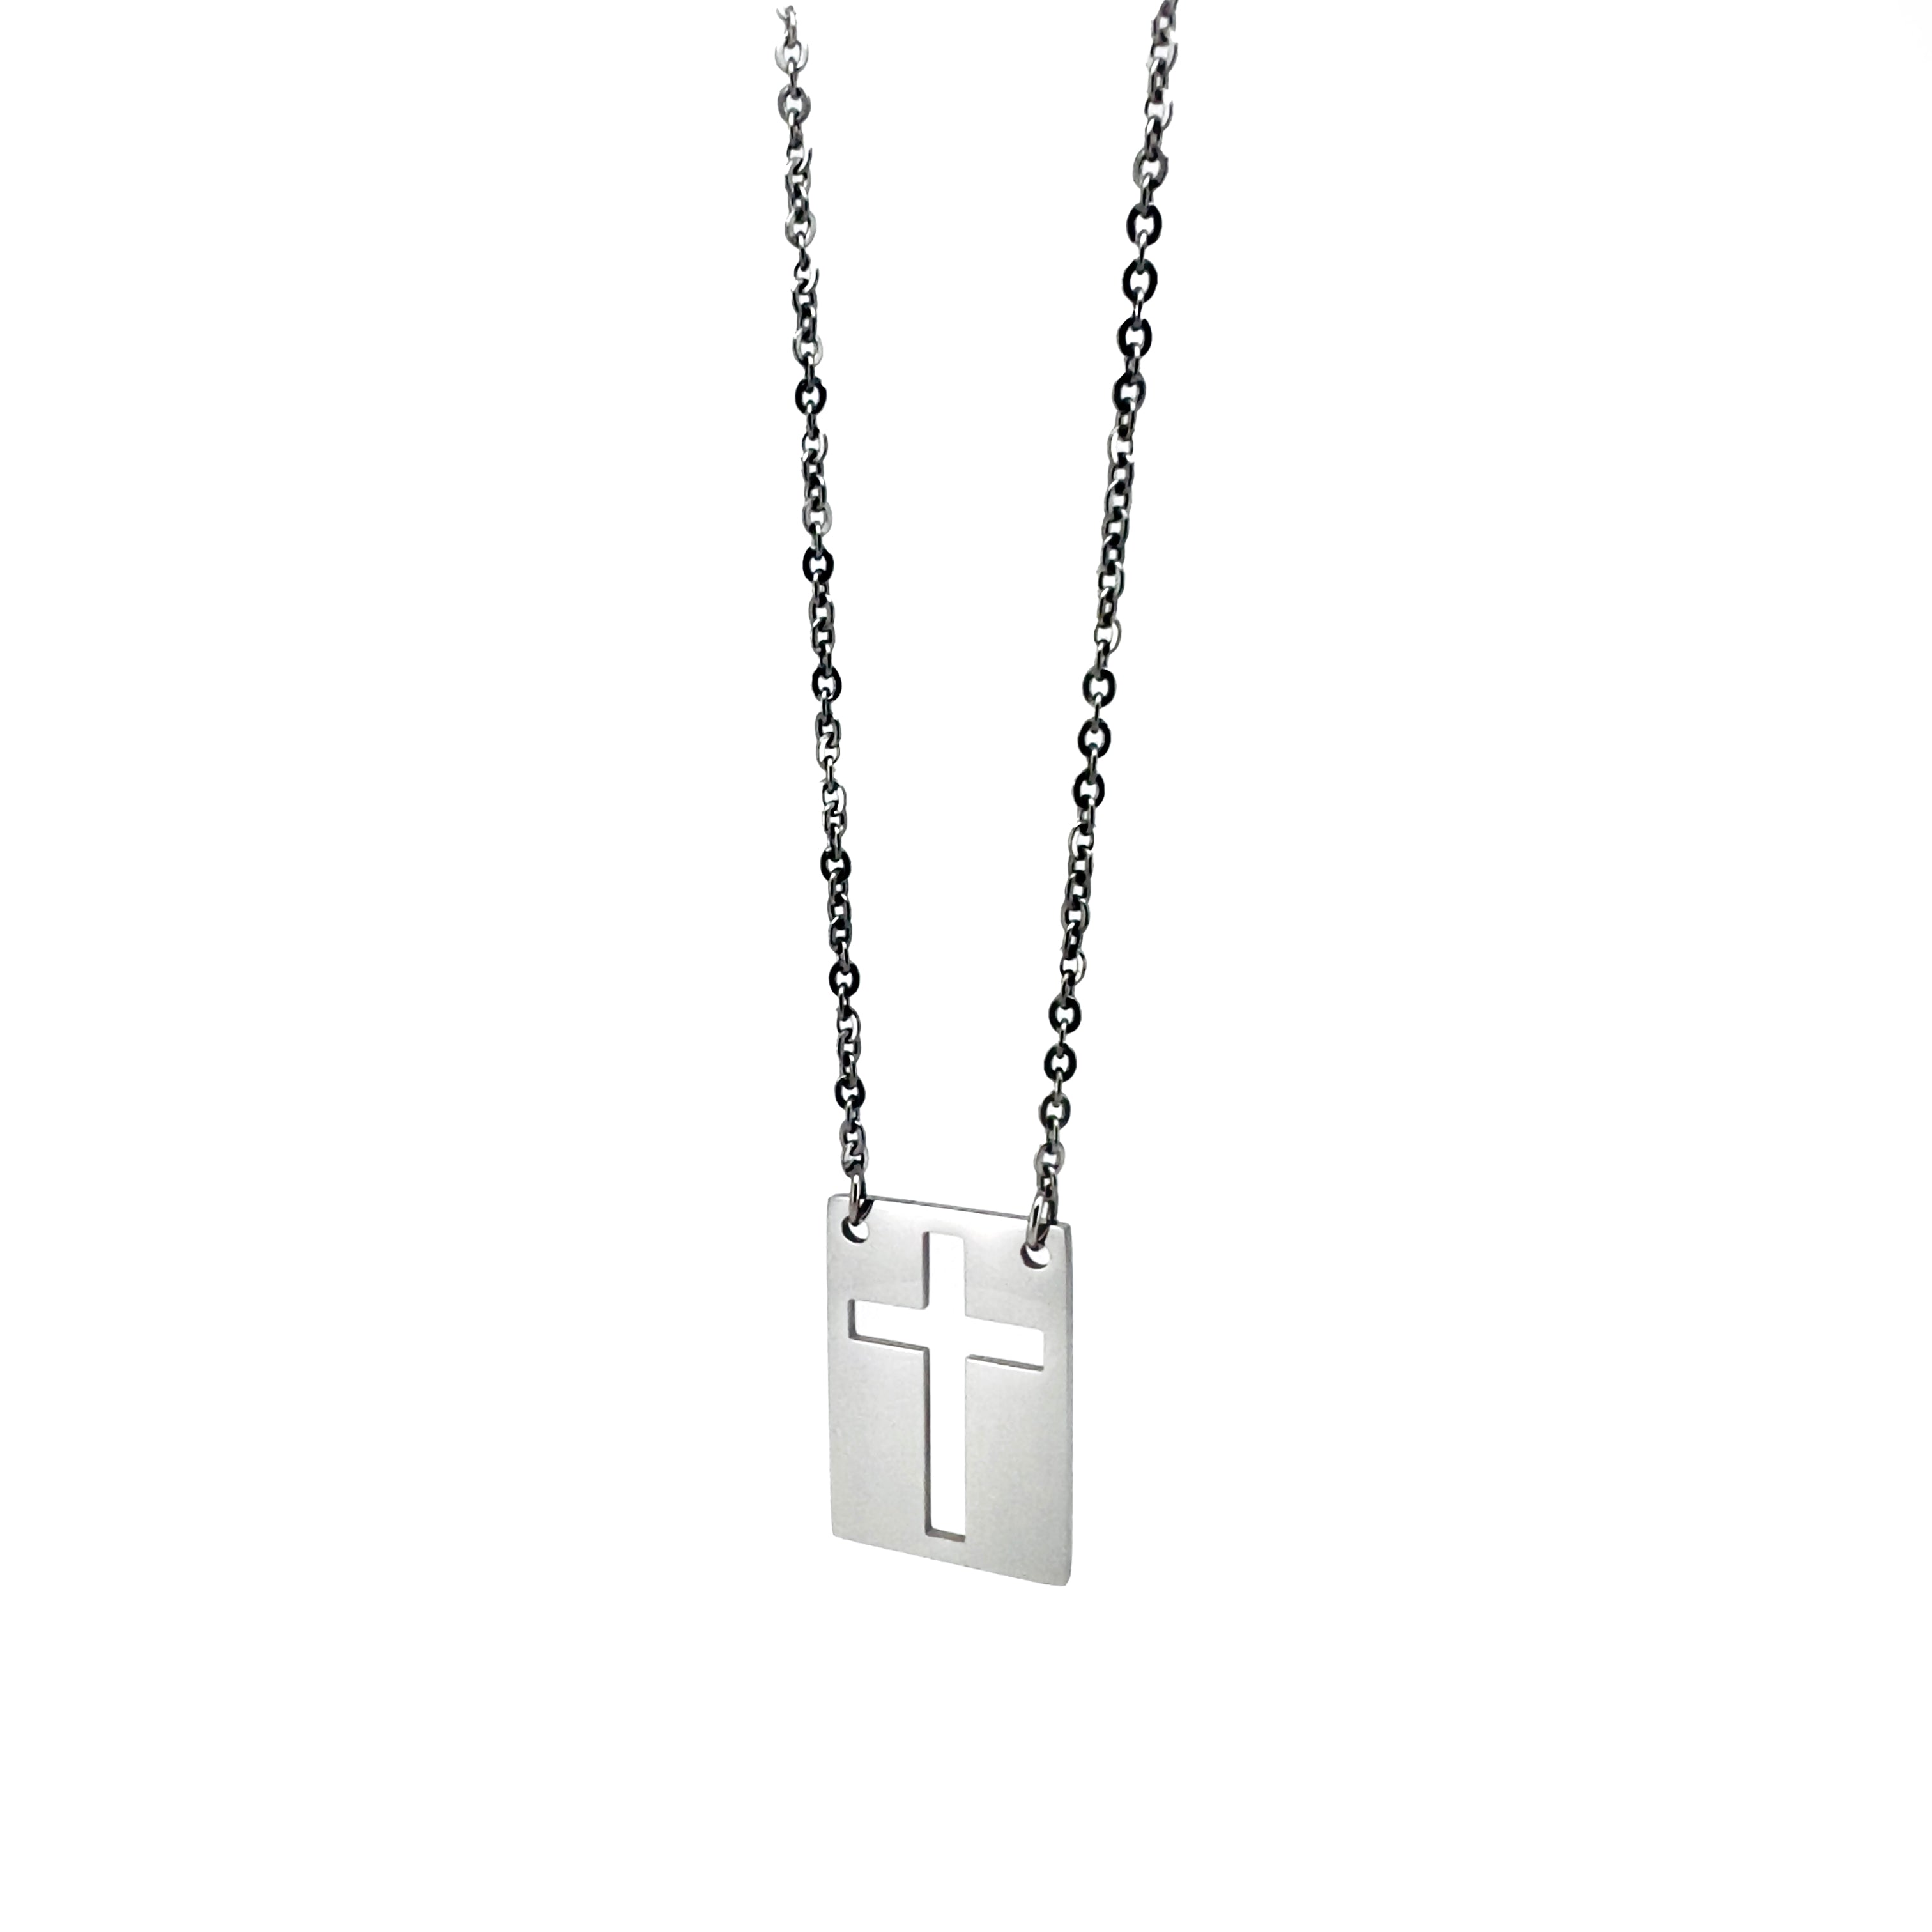 Makaiden Stainless Steel Chain Necklace with Symbolic Pendant